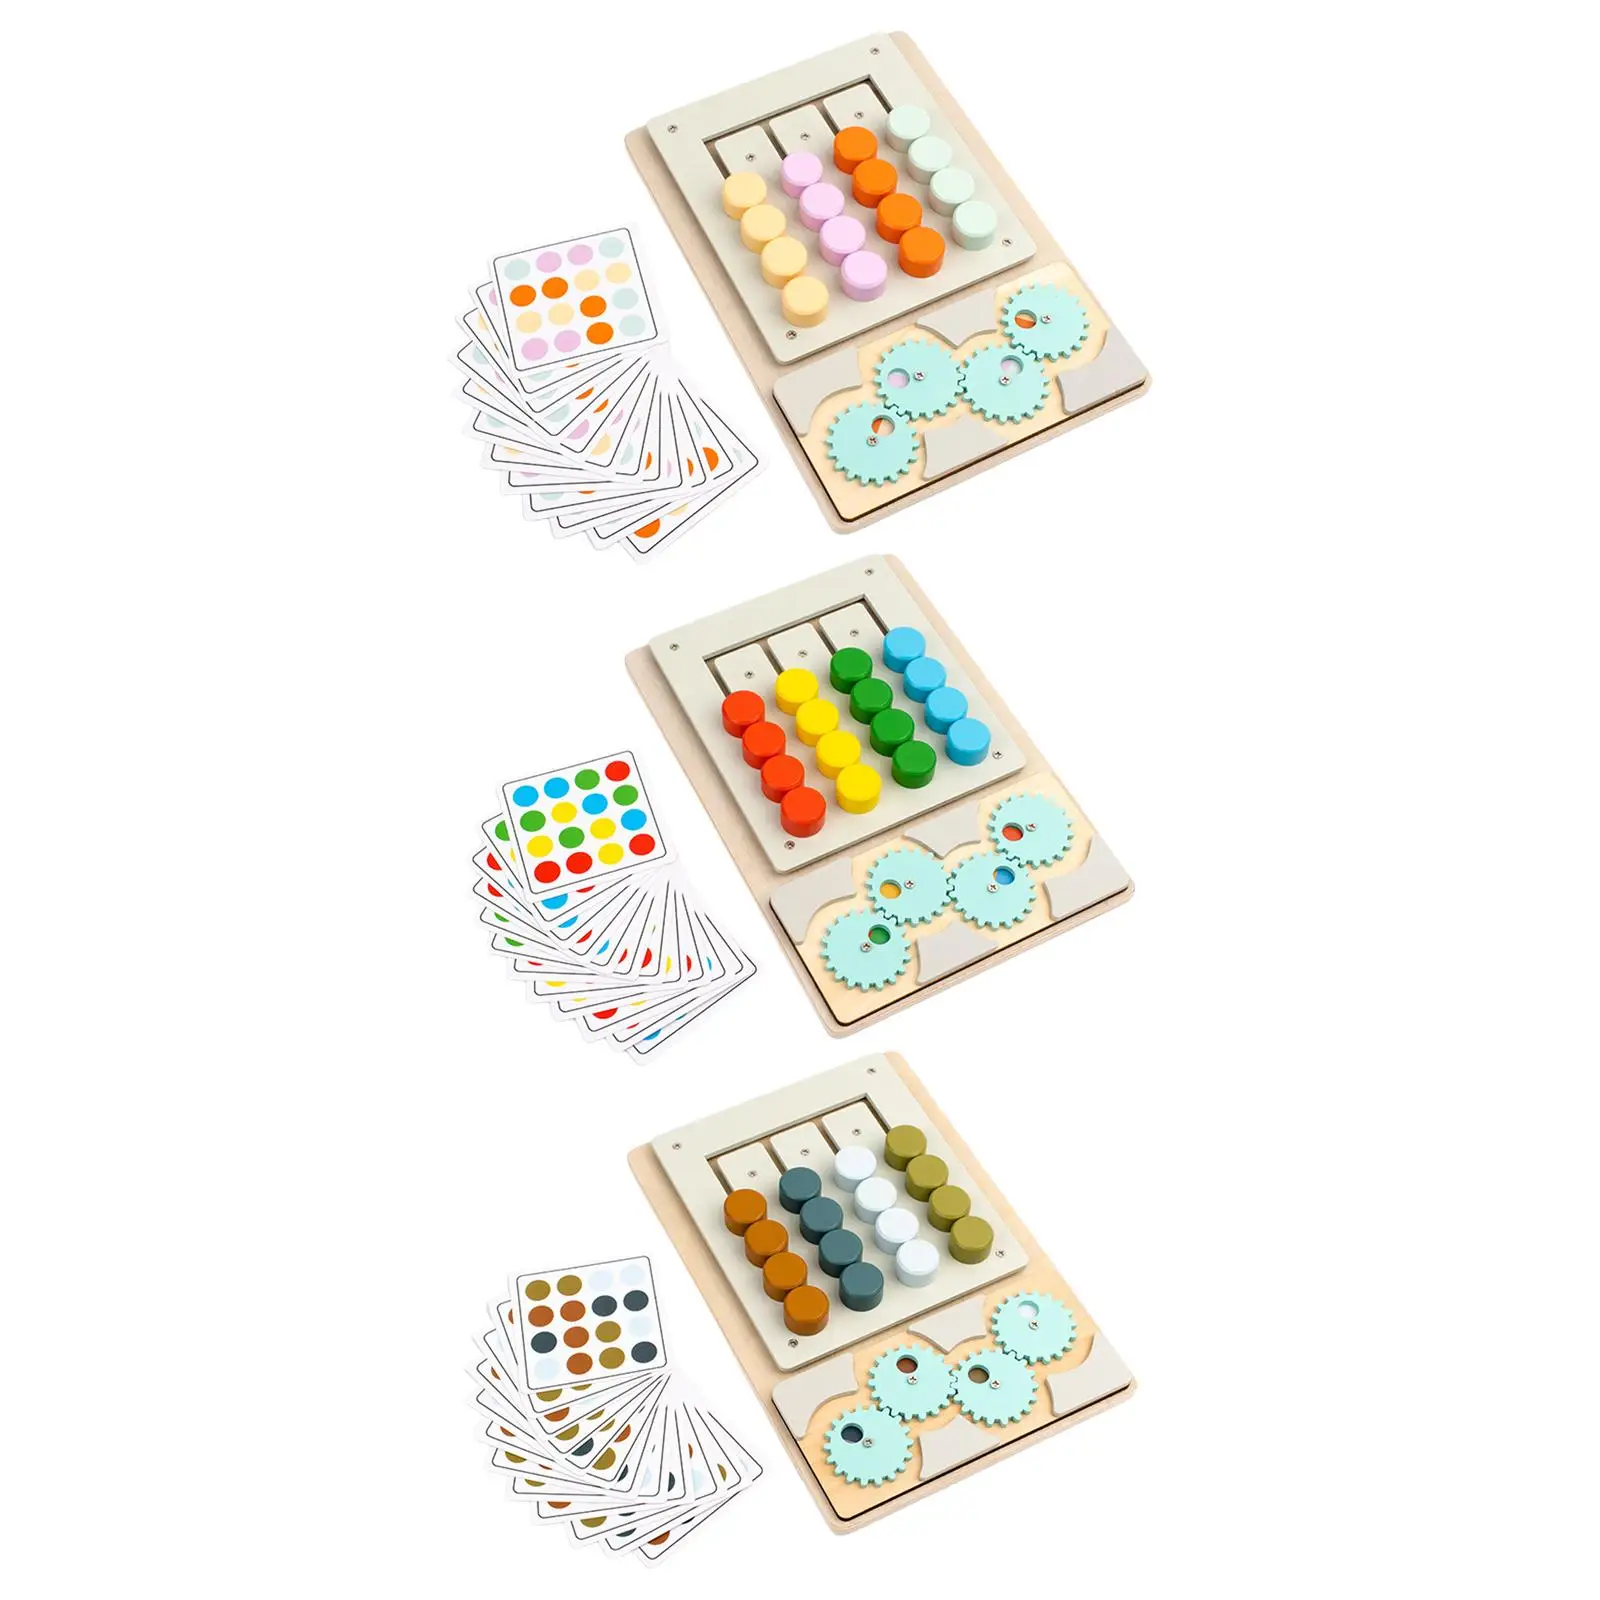 Sliding Puzzle Color Sorting Toy Brain Teasers Fun Montessori Educational for Boys Girls Family Party Favors Travel Car Toy